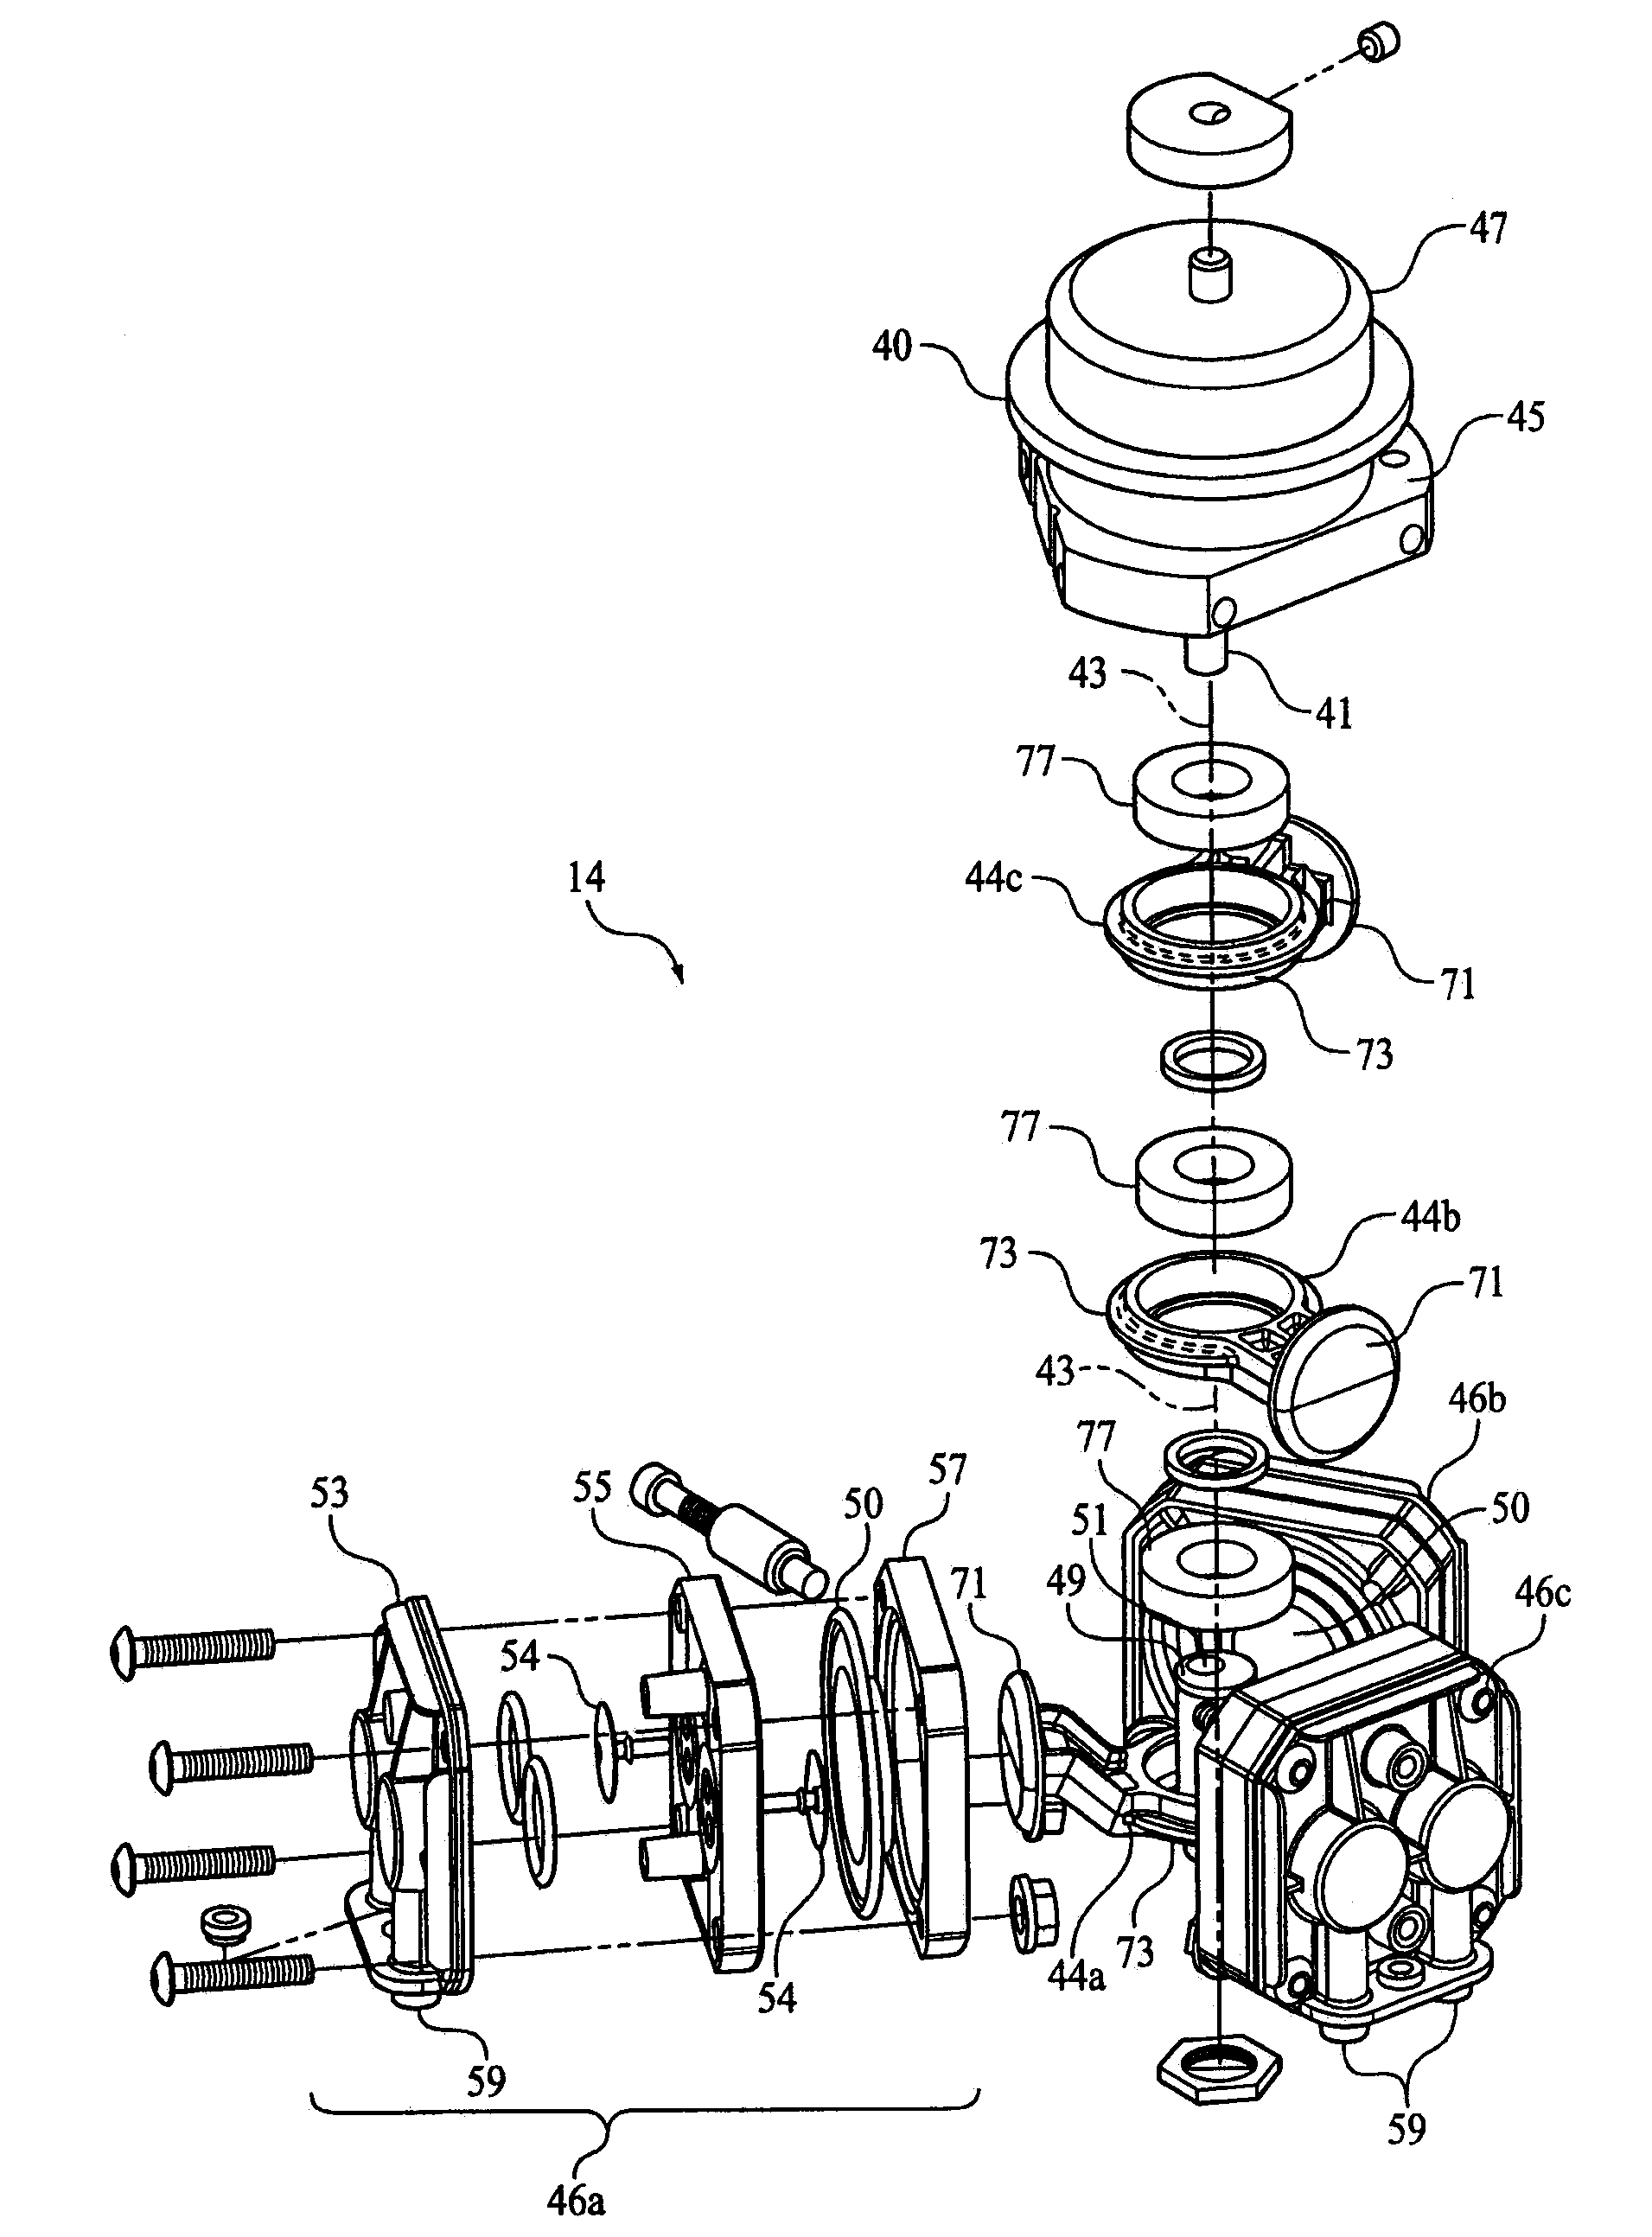 Compressors and methods for use